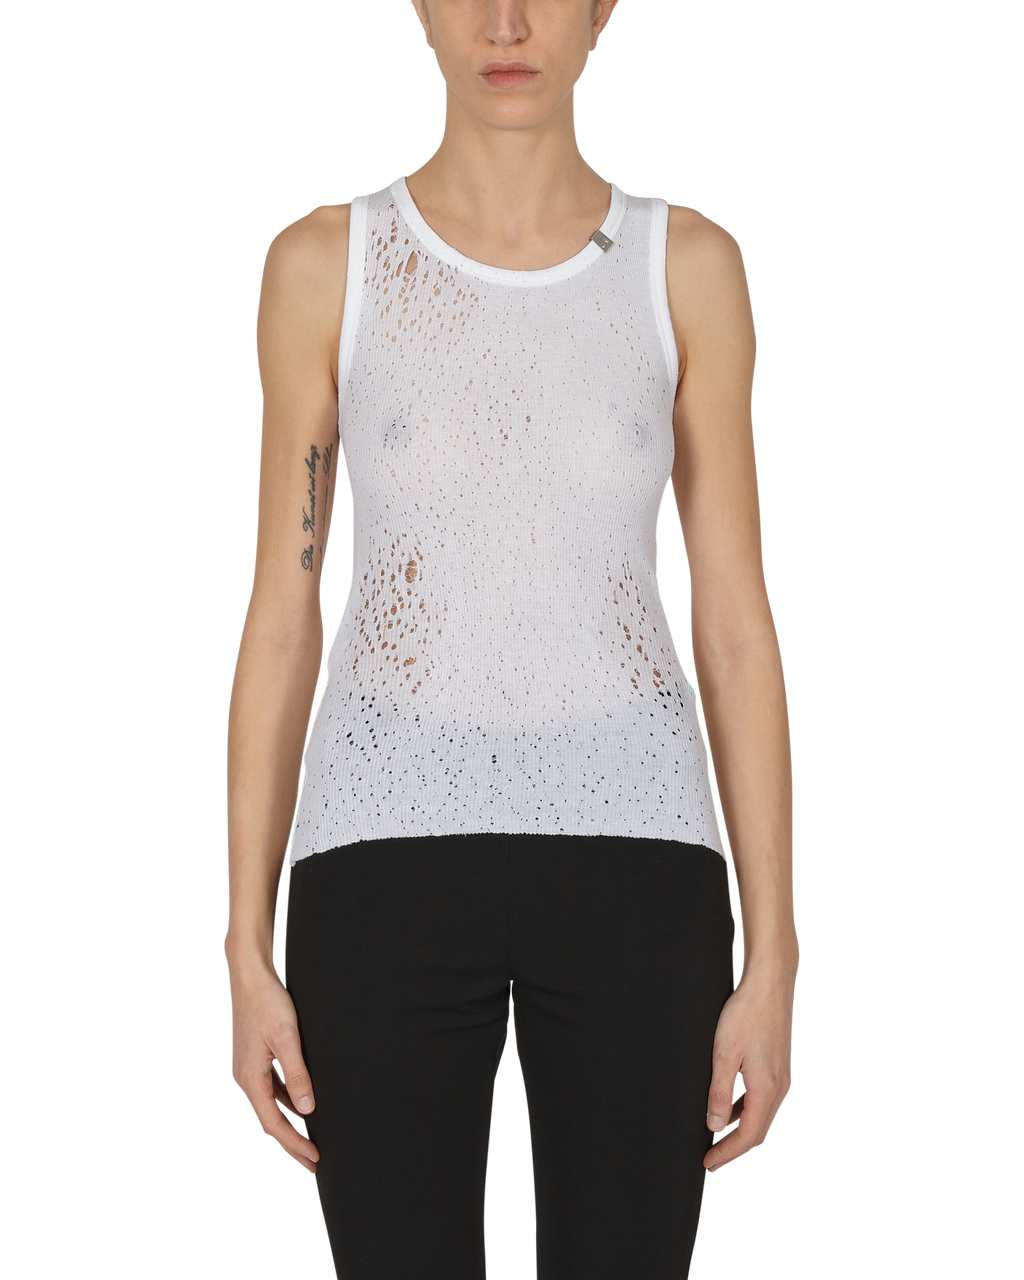 DESTROYED WOMENS TANK TOP